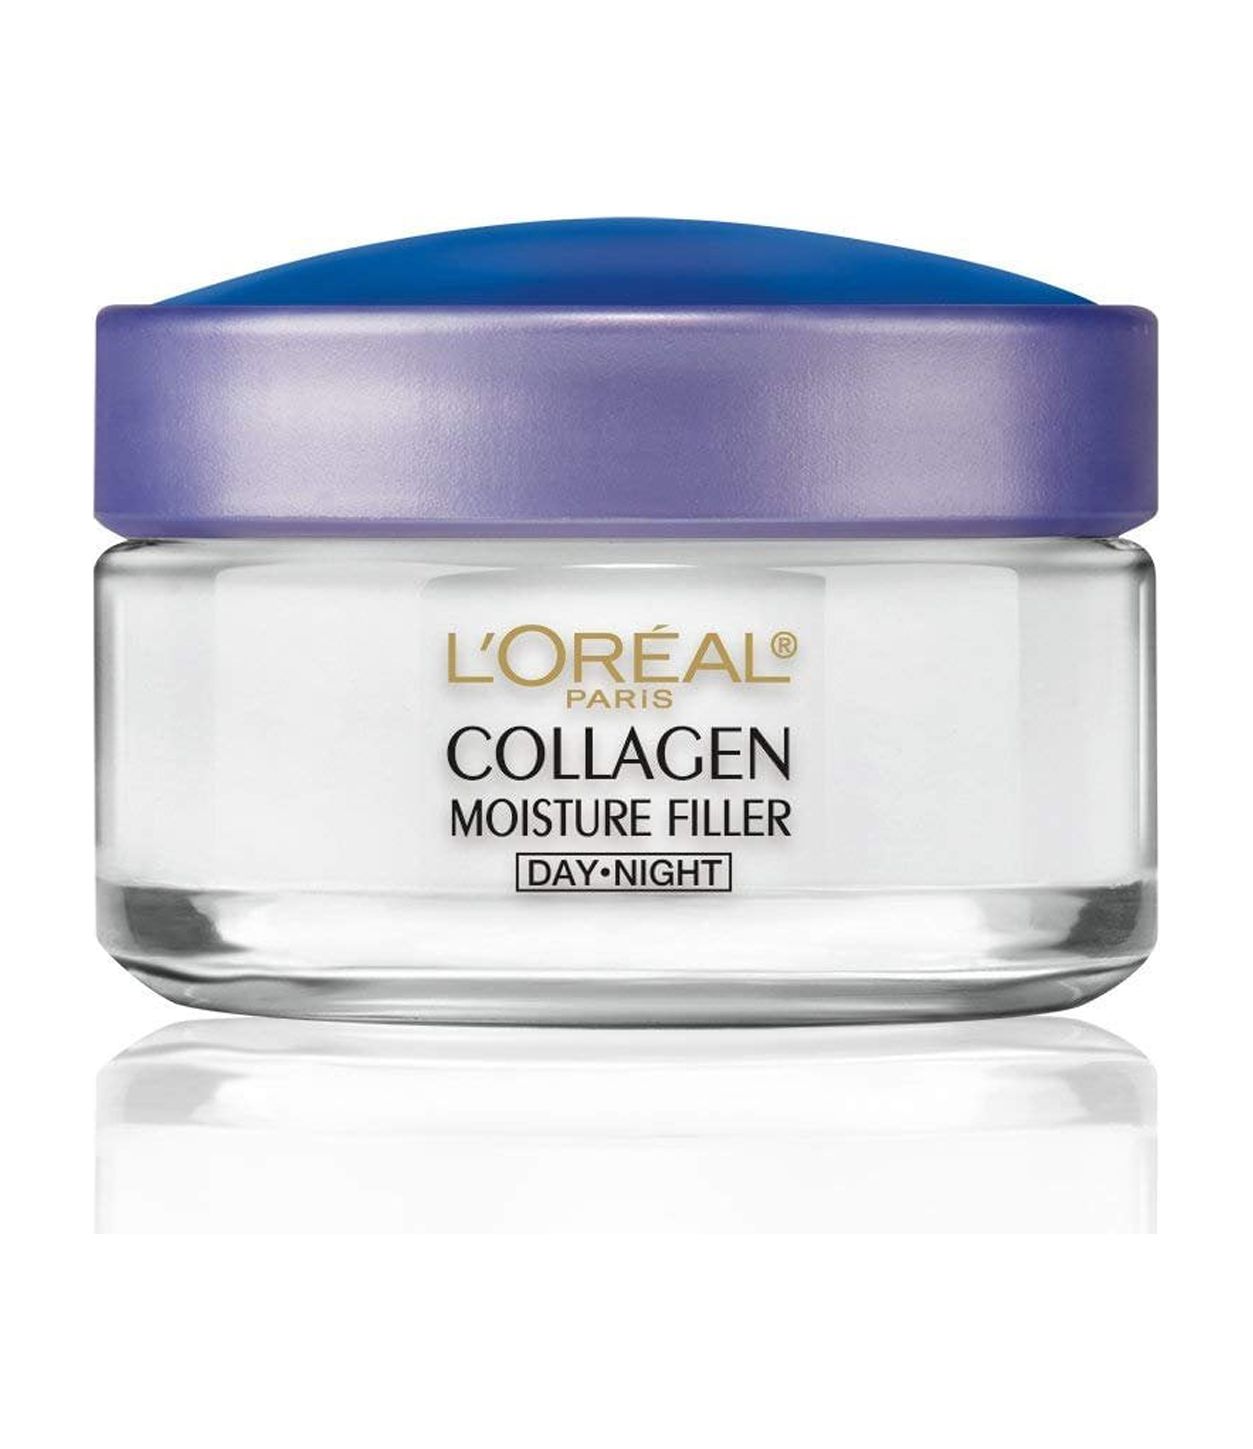 L'Oreal Paris Collagen Moisture Filler Anti Aging Day and Night Face Cream, 1.7 oz - image 1 of 10